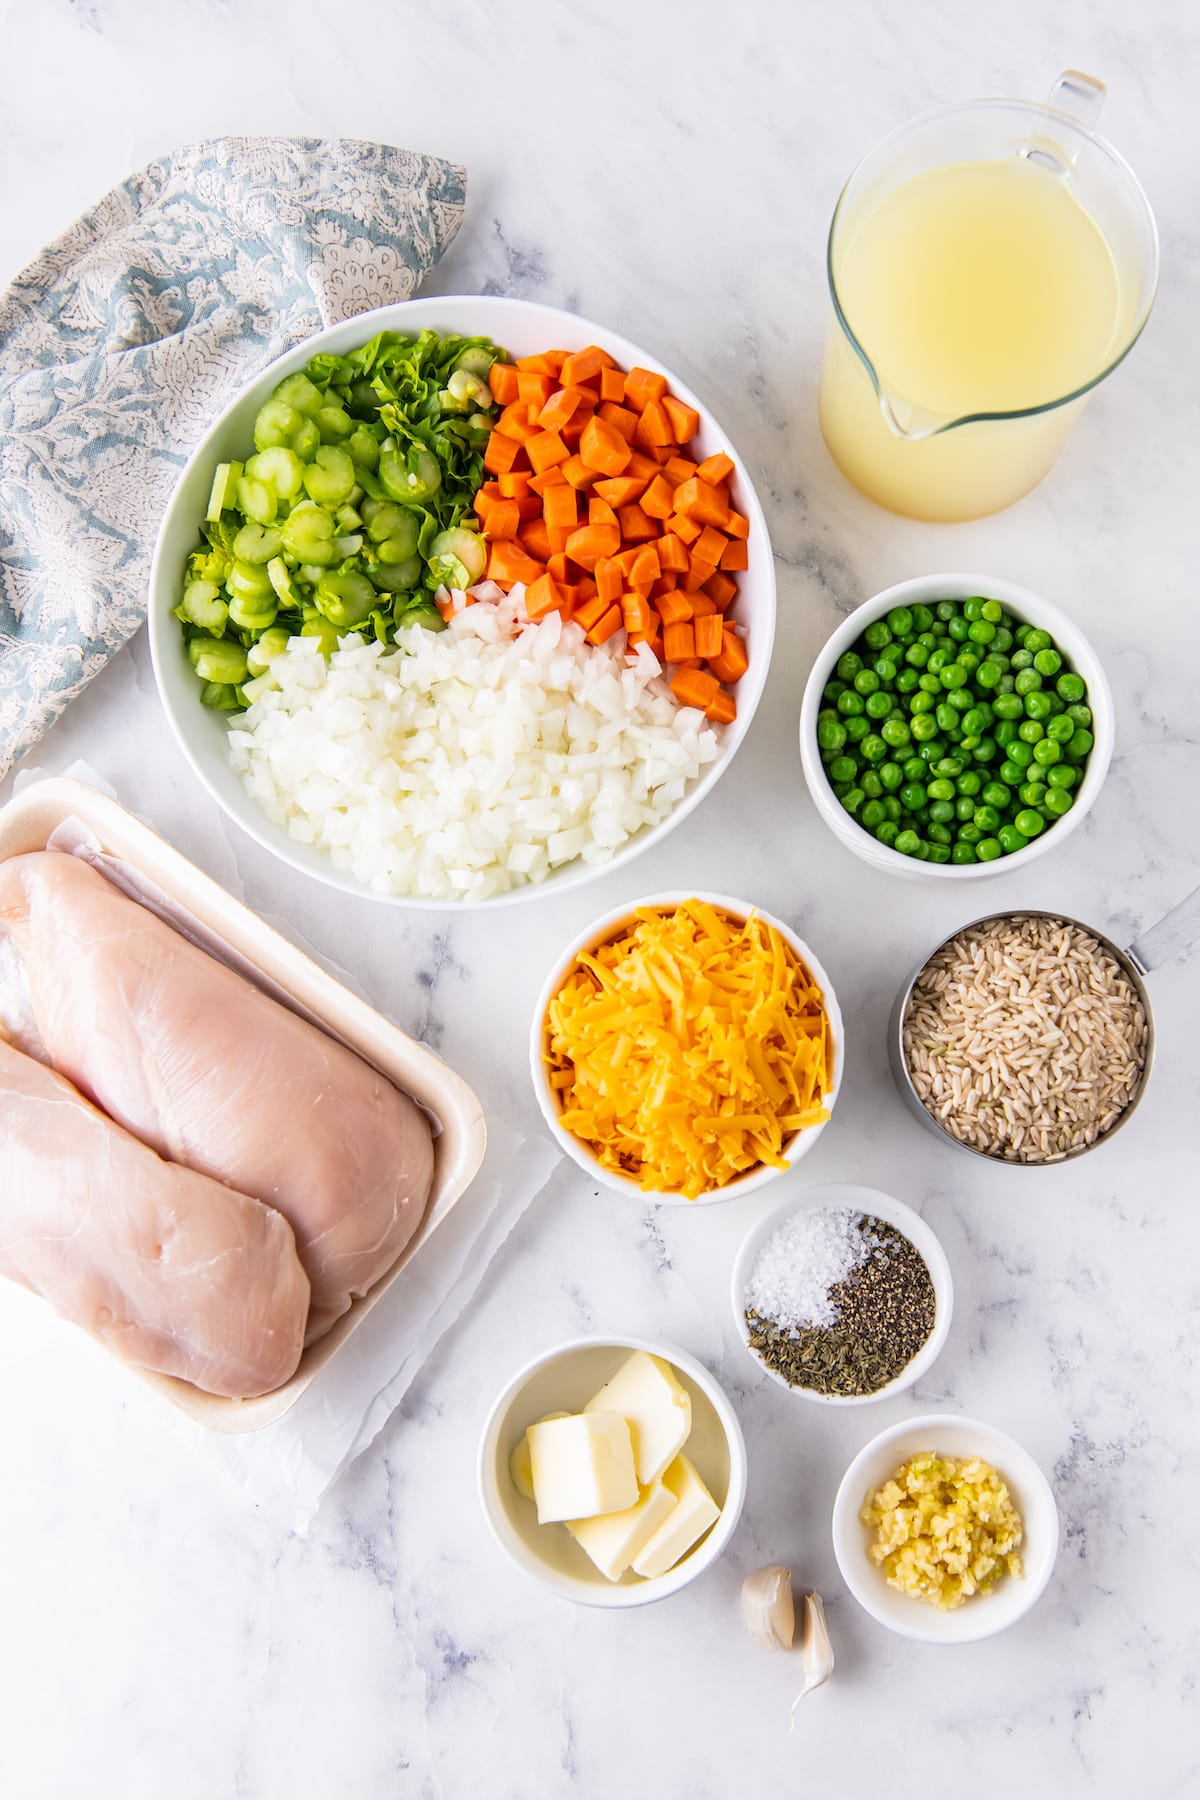 an assortment of dinner ingredients like chicken, vegetables, peas, cheese, rice, seasonings and butter